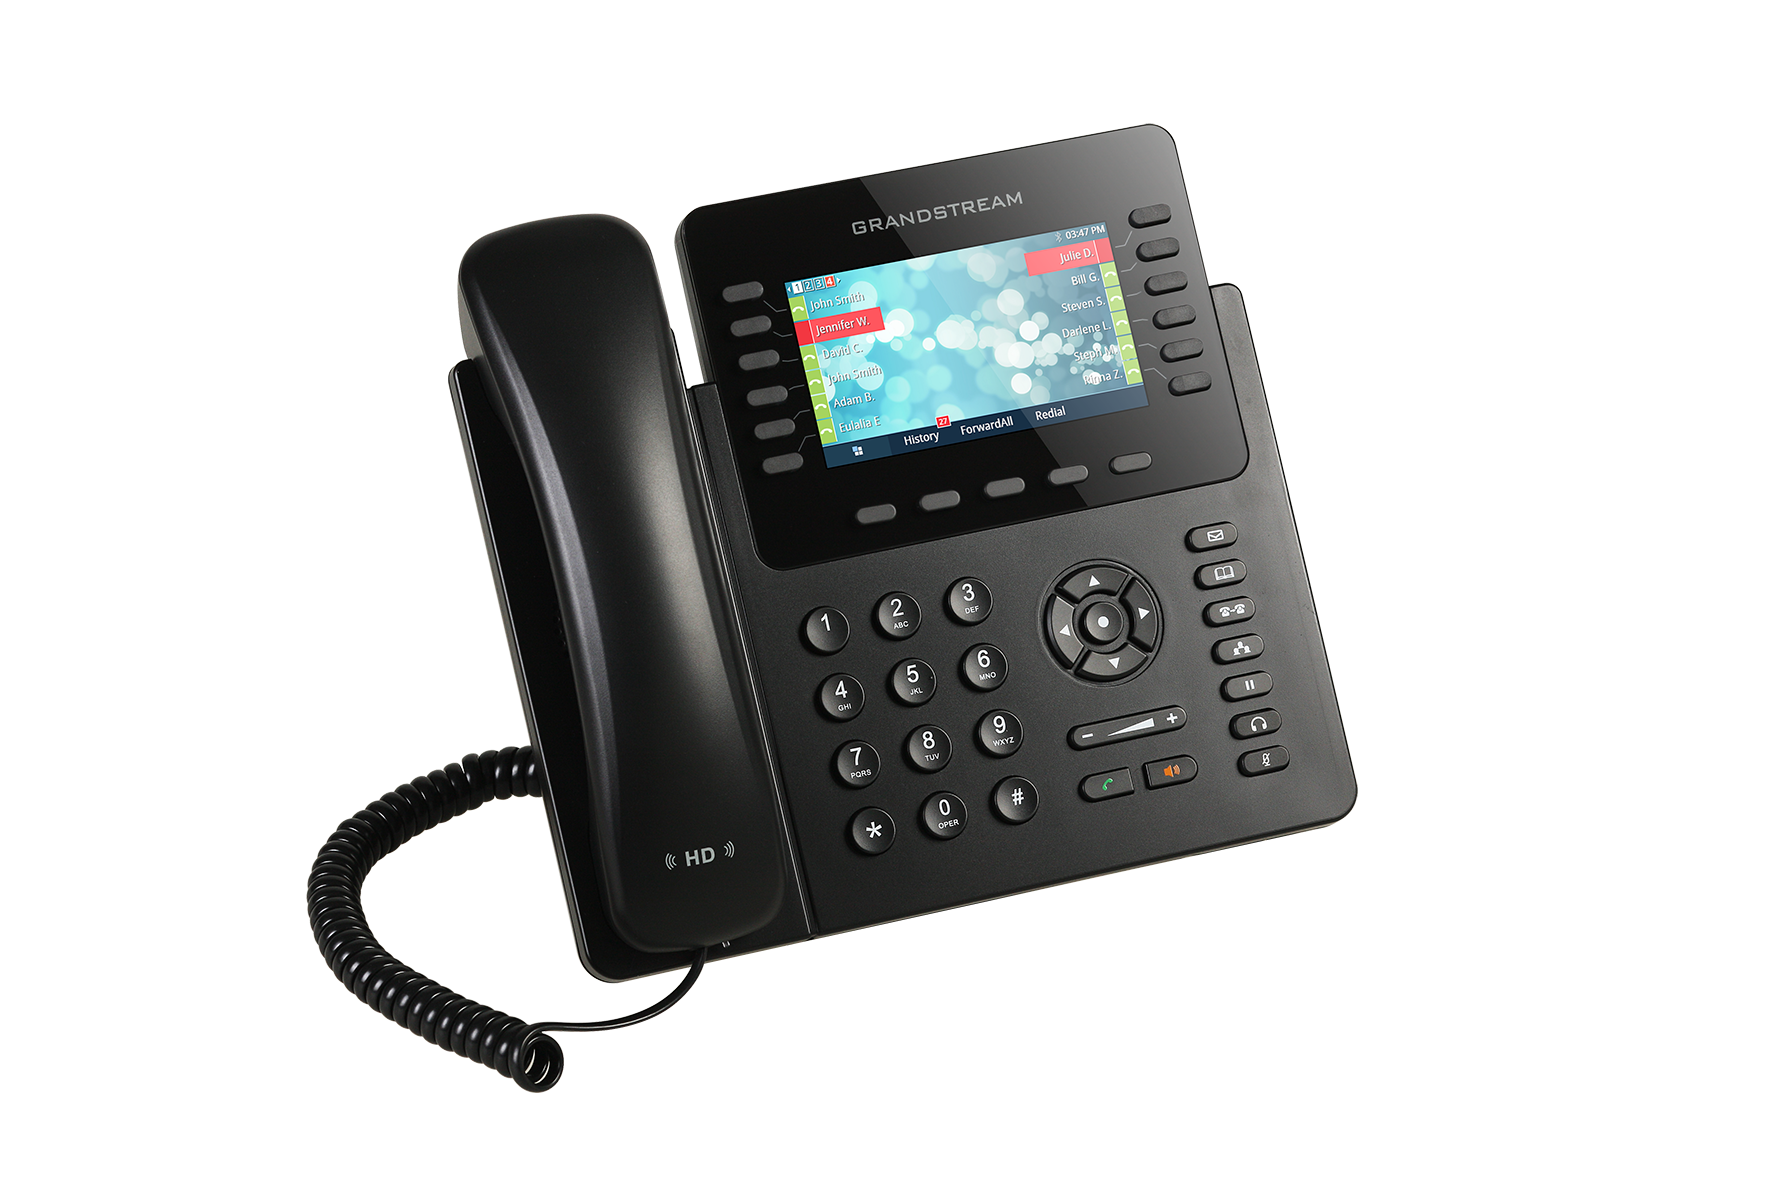 Grandstream GXP2130 Enterprise IP Telephone with 2.8-Inch Color Display by Grandstream